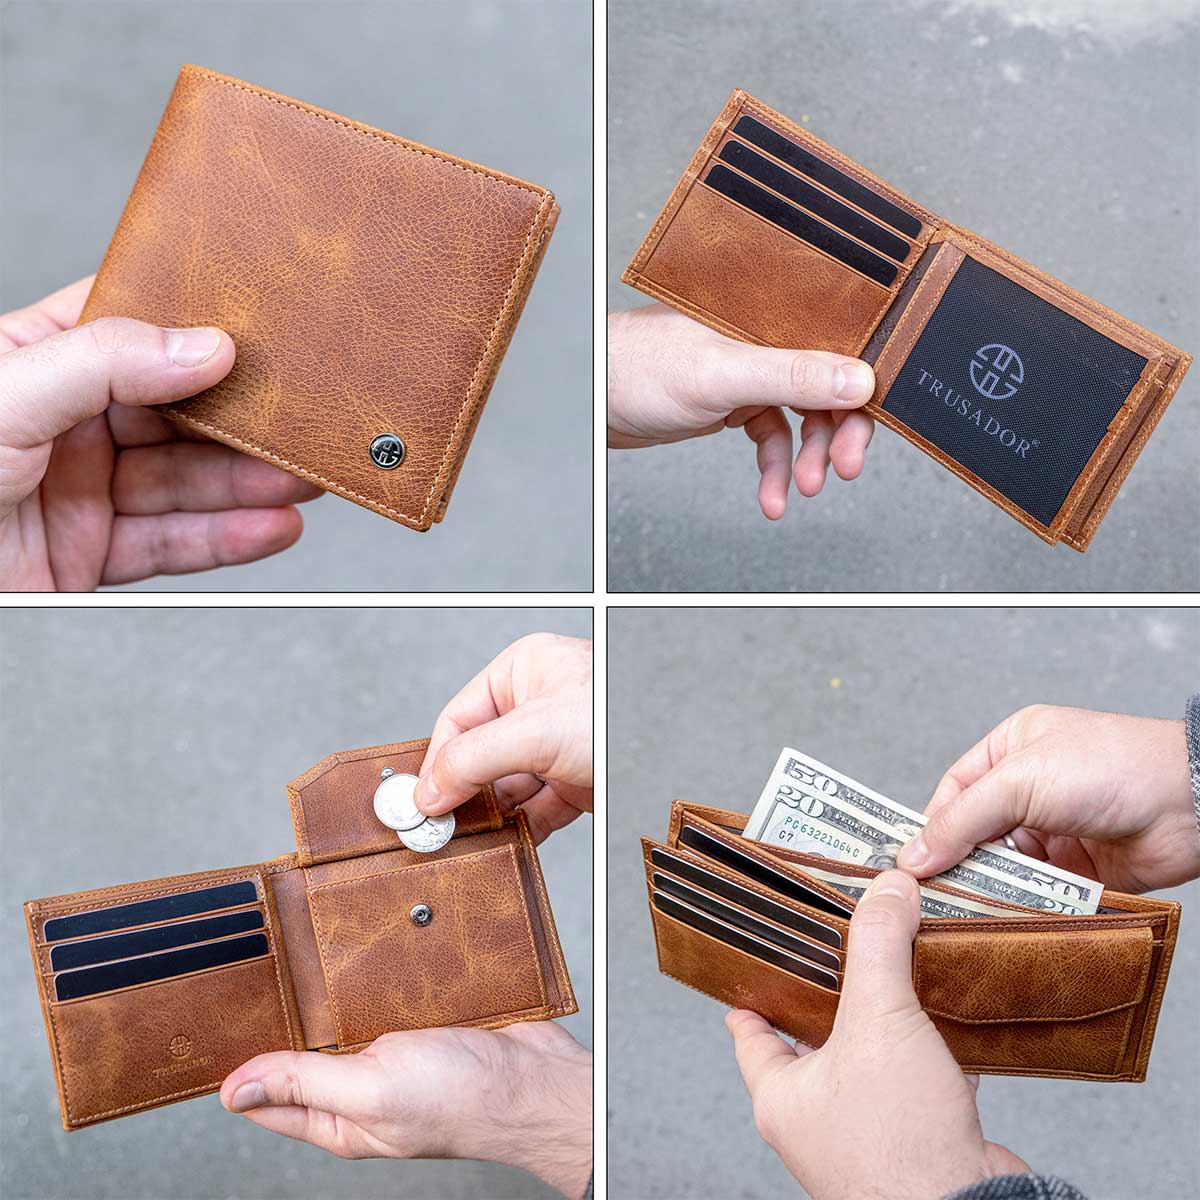 Mens Leather Wallet With Coin Pocket